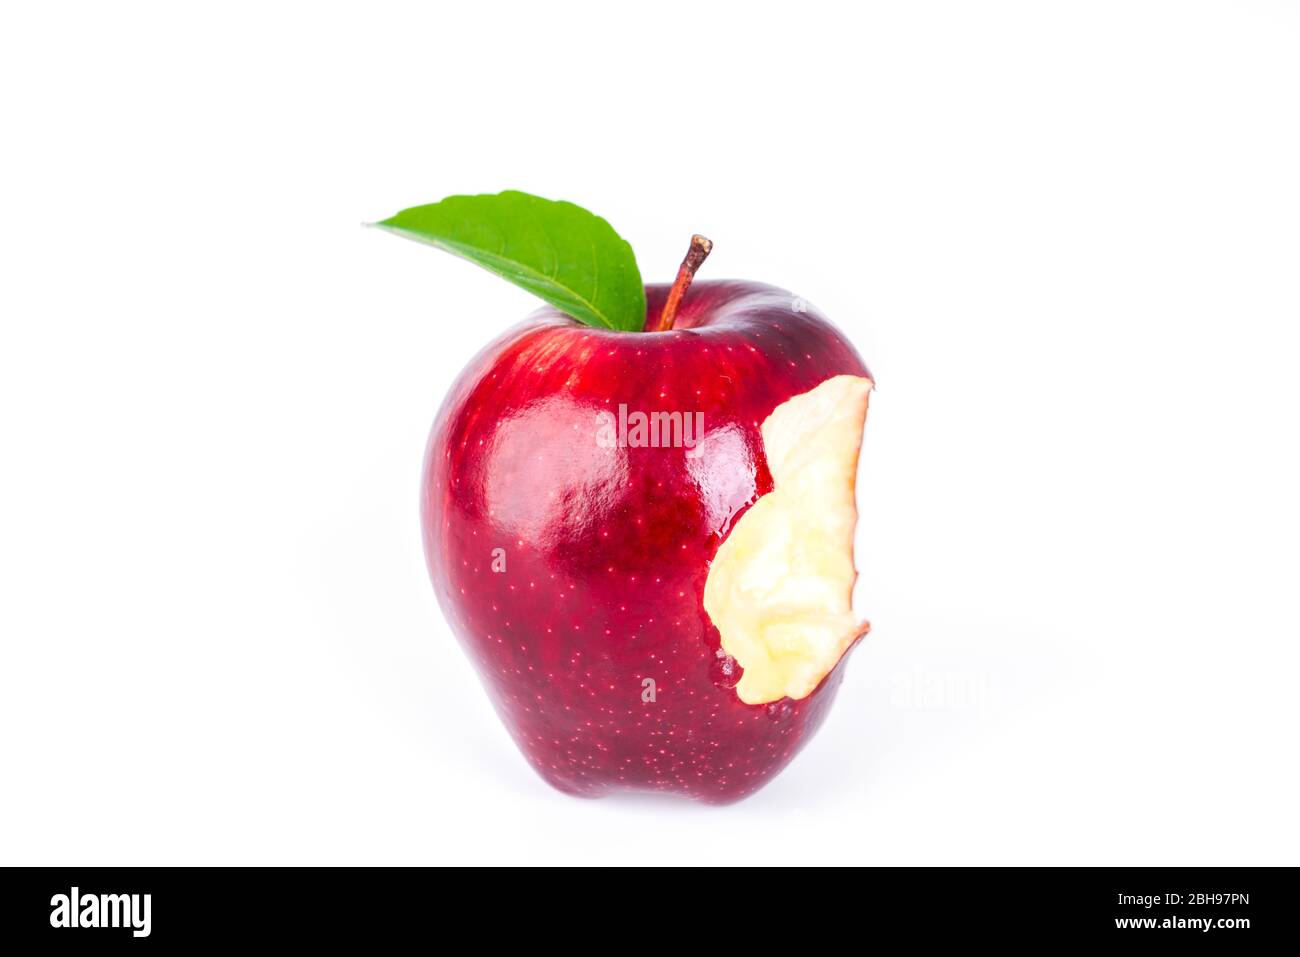 Red apple with green leaf and missing a bite . Stock Photo